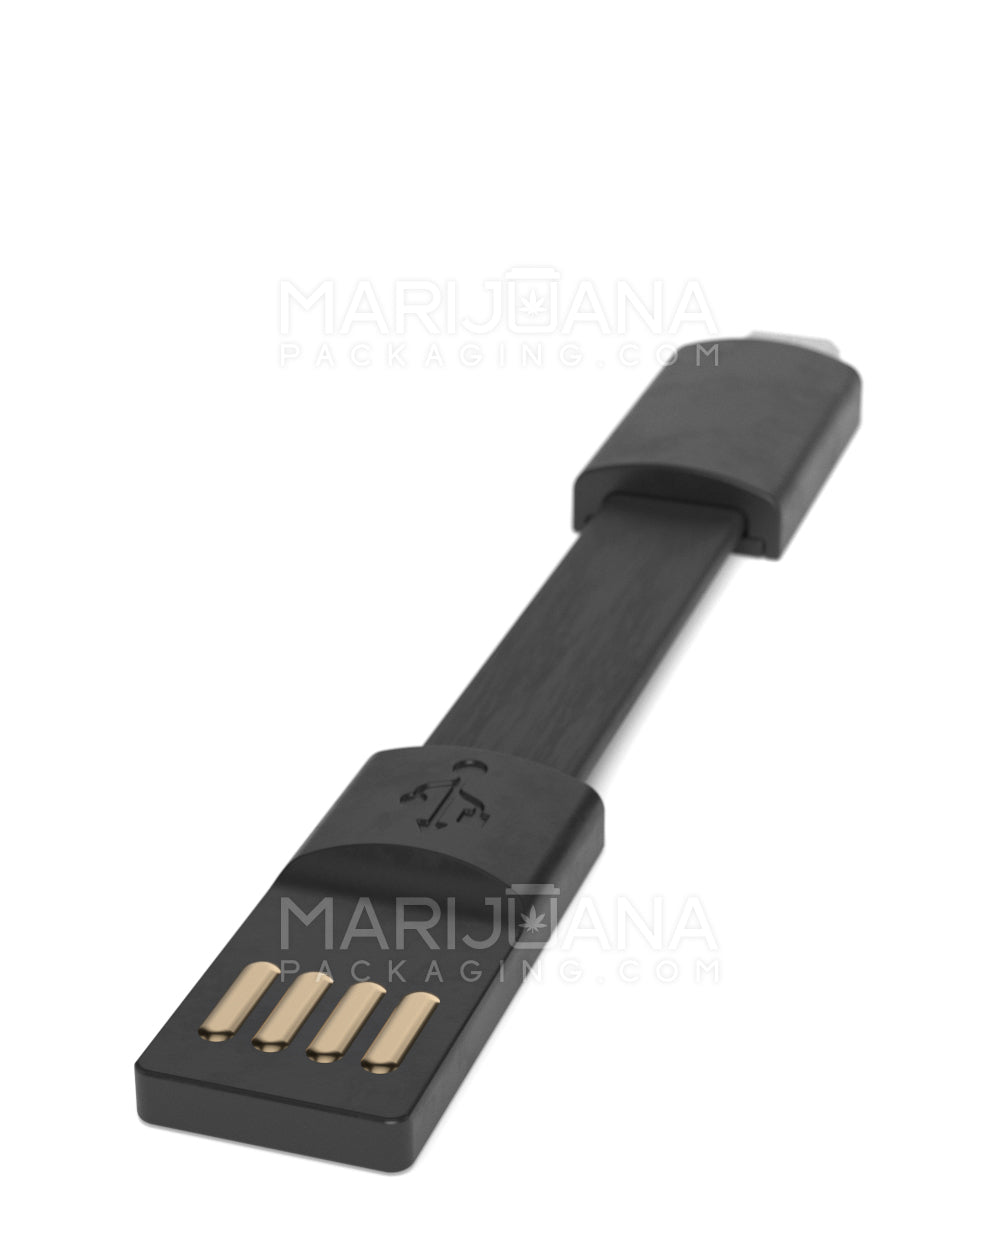 Vaporizer 3.5" USB to Micro USB Connection Cable | Black - 100 Count - 5